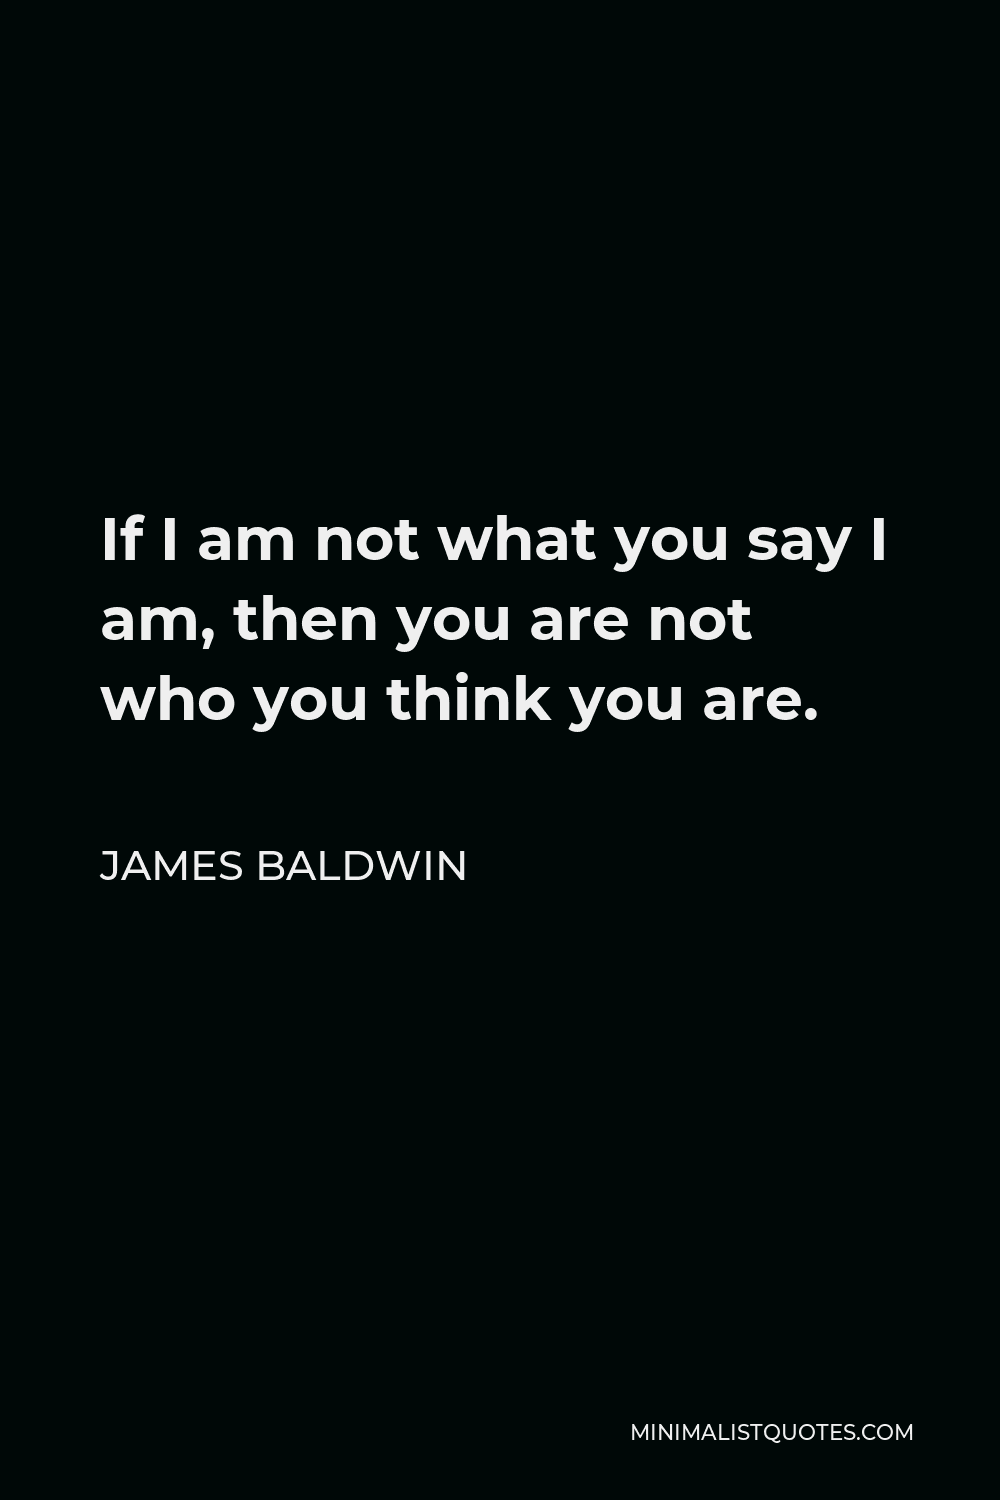 James Baldwin Quote - If I am not what you say I am, then you are not who you think you are.